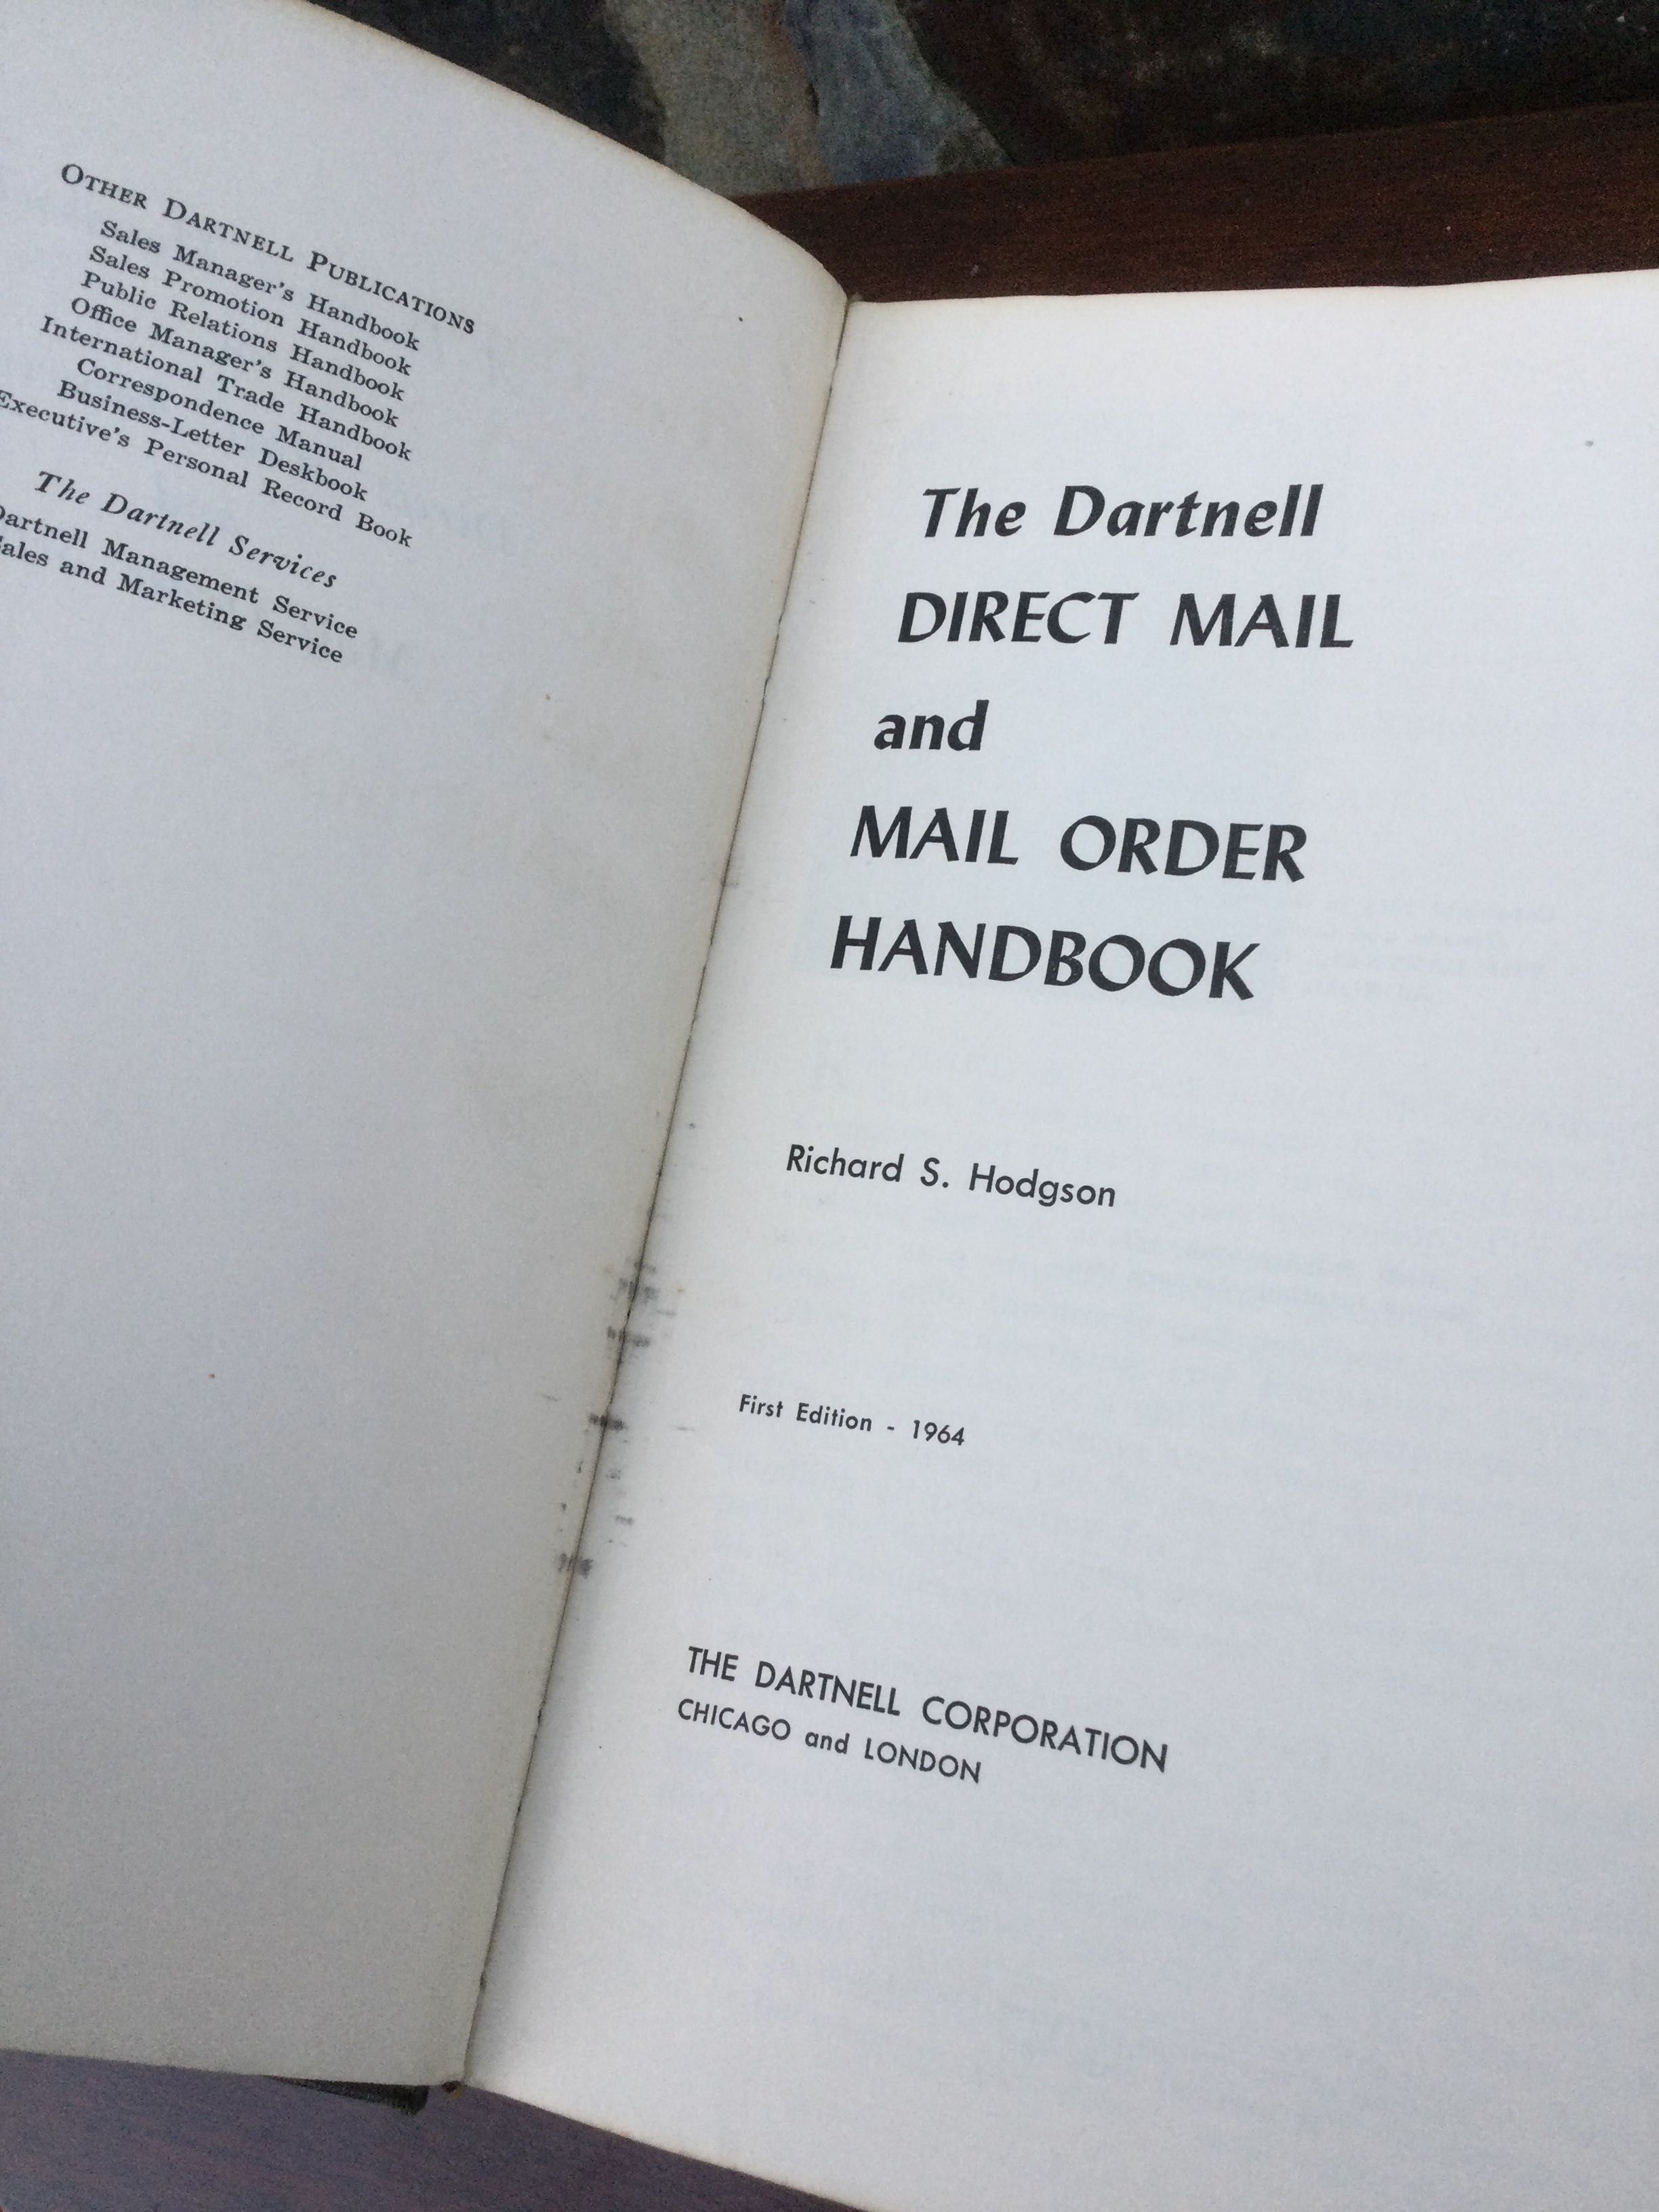 Livro Dartnell Direct Mail and Mail Order First Edition 1964